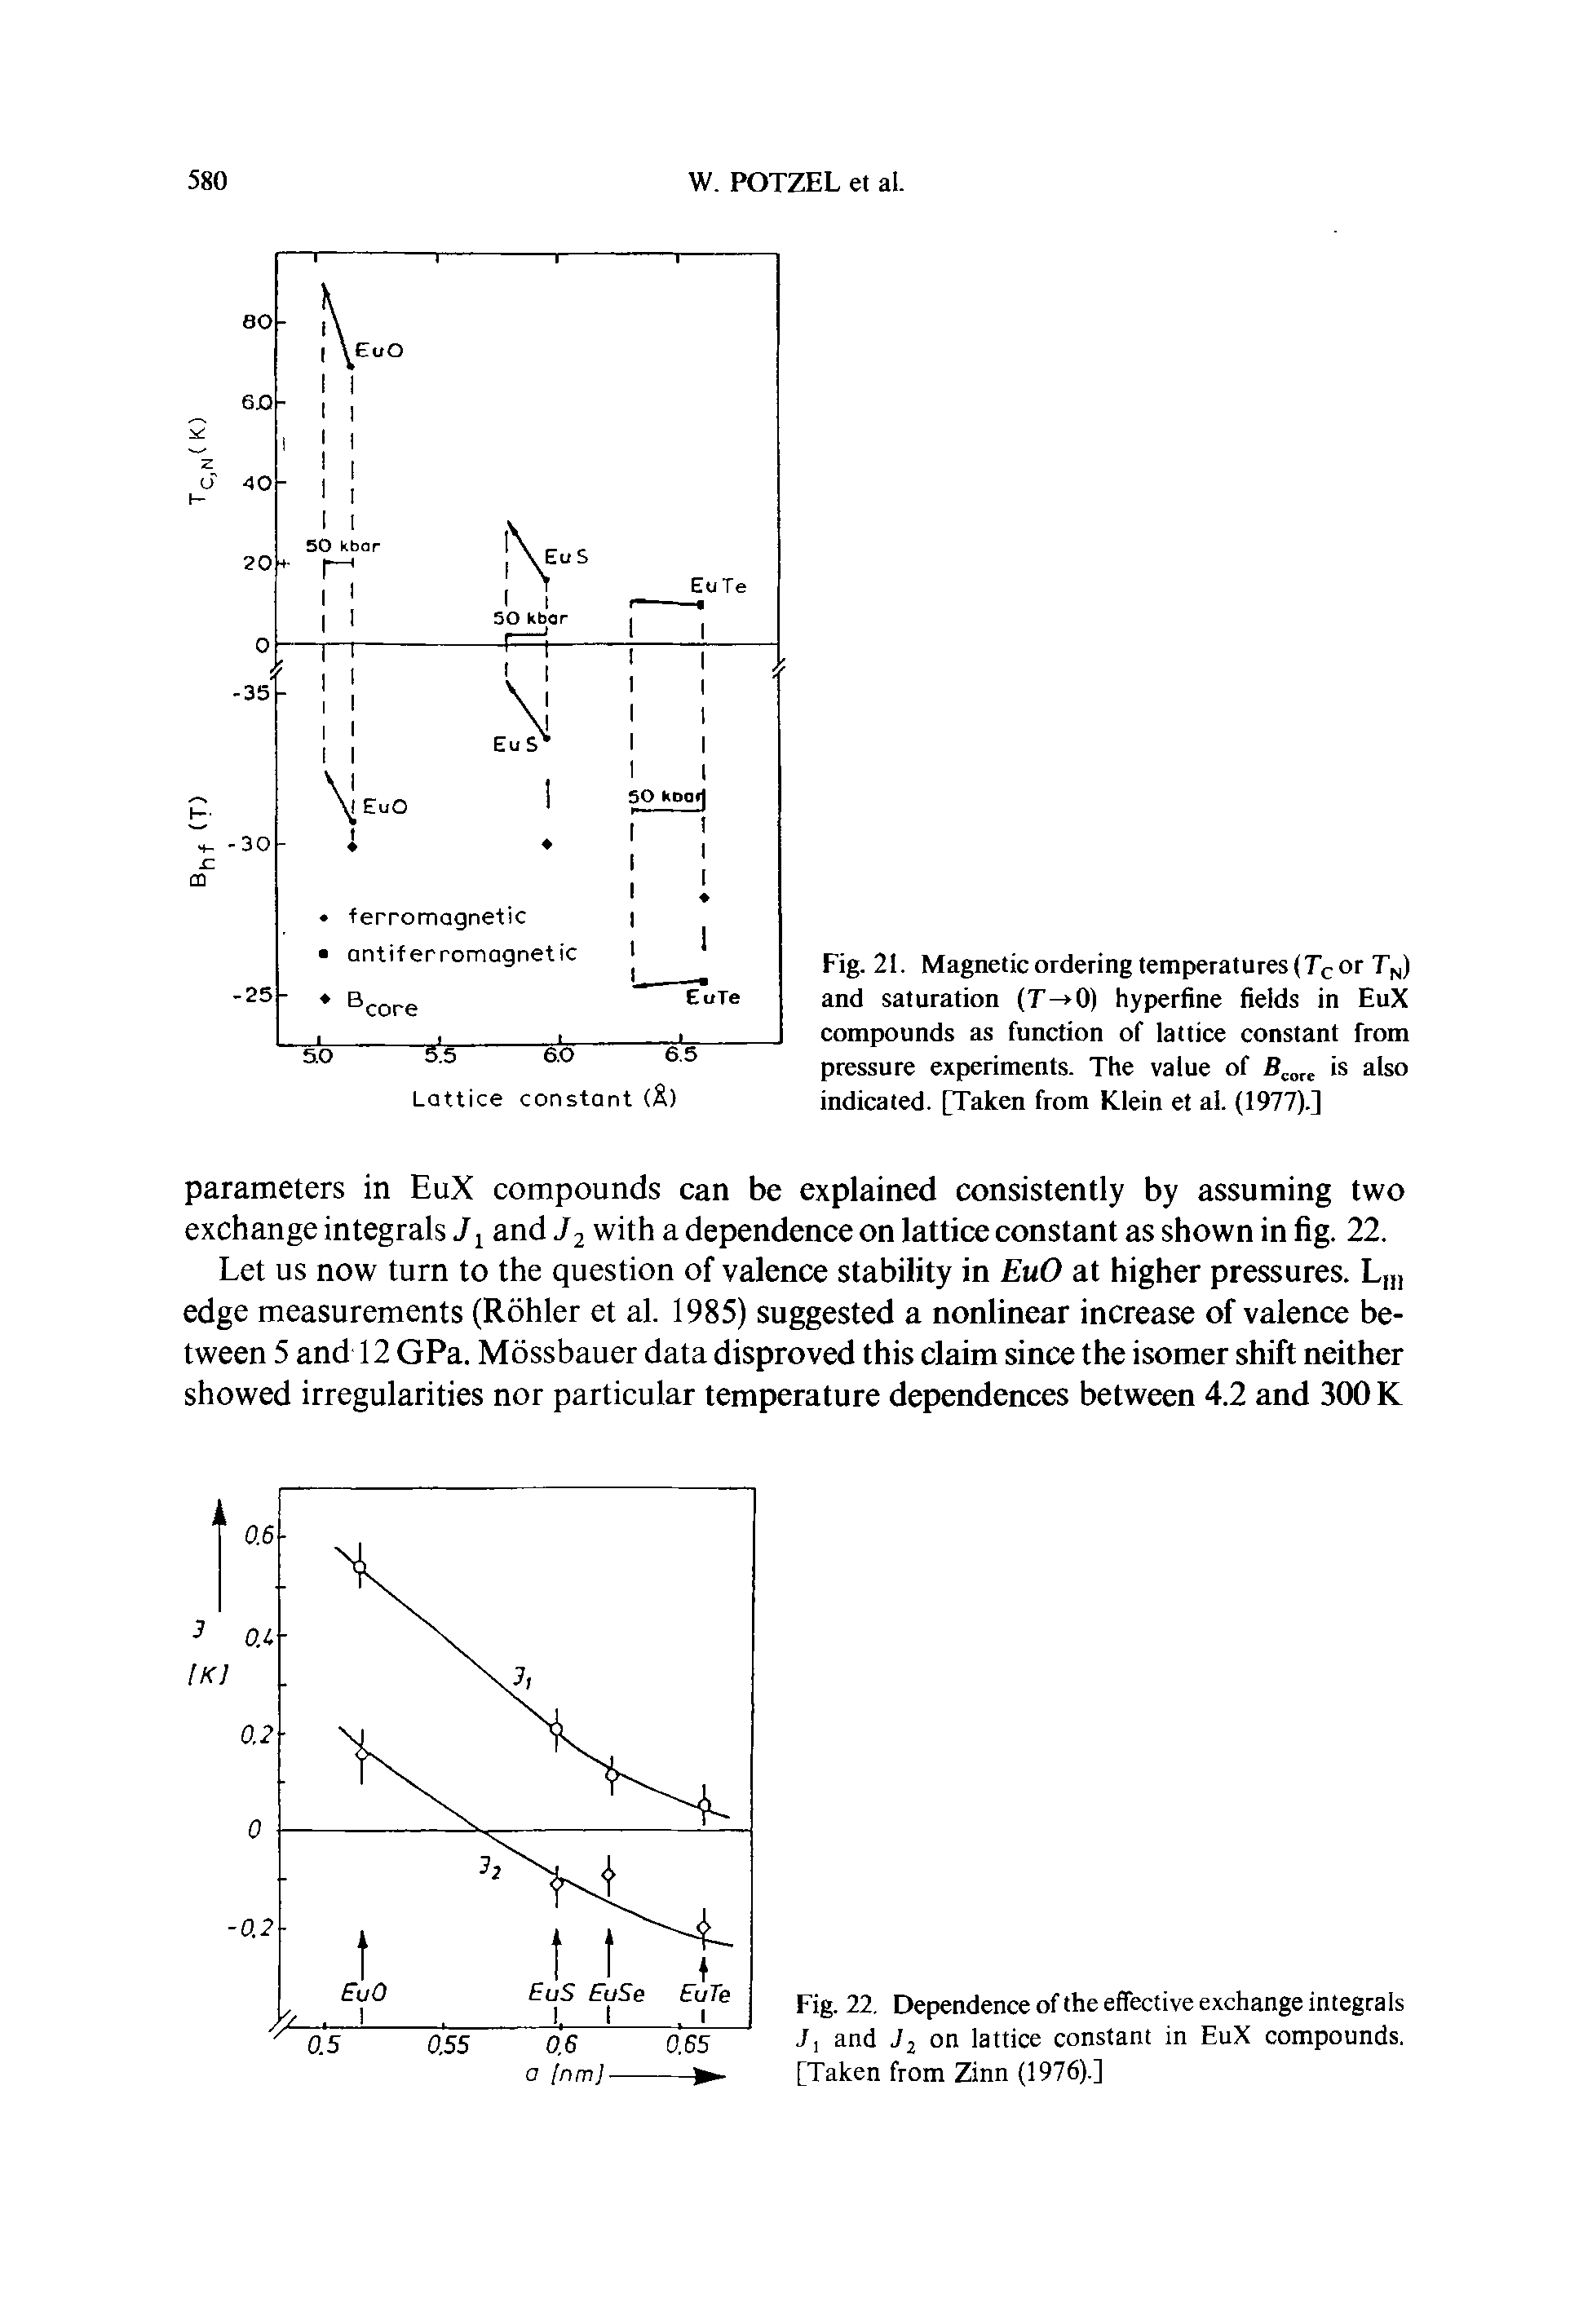 Fig. 22. Dependence of (he effective exchange integrals J, and J2 on lattice constant in EuX compounds. [Taken from Zinn (1976).]...